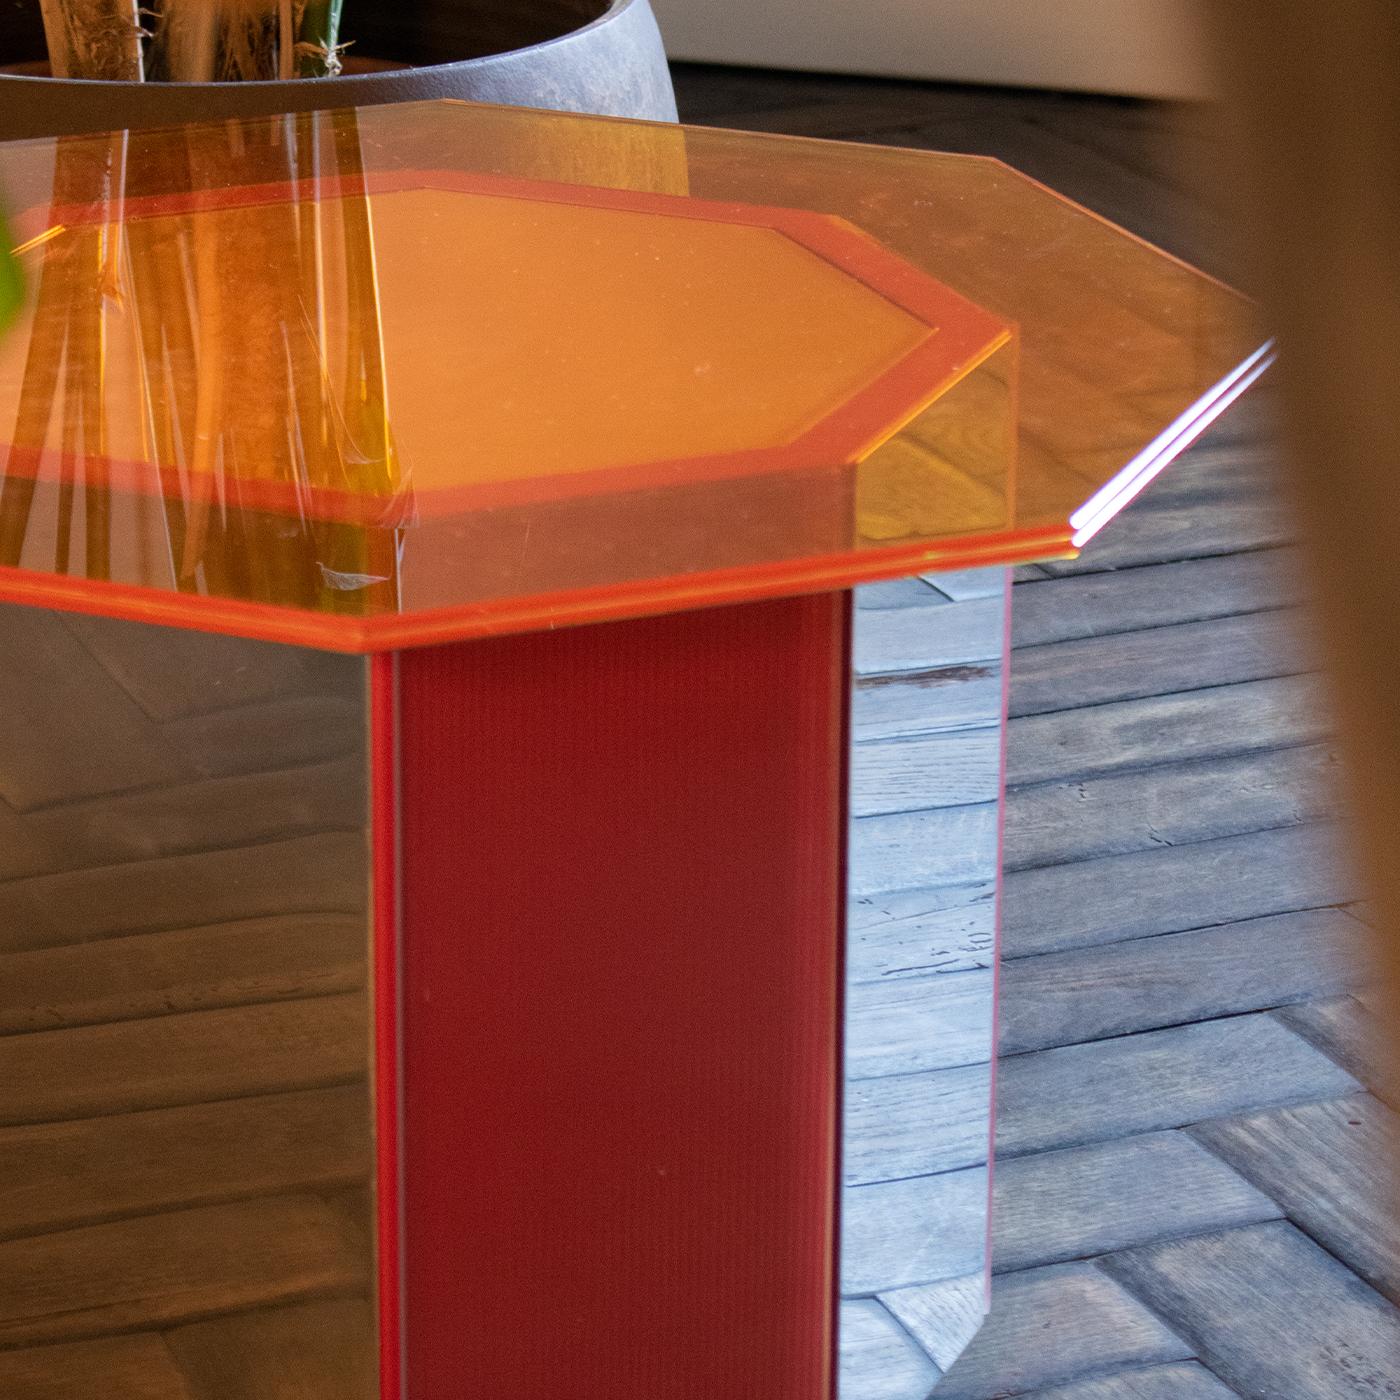 A distinctive chromatic effect for a modern dining area, this Sandra e Raimondo side table pays tribute to a famous comedy couple who were complete opposites. Showcasing a sturdy regular octagonal base crafted in steel-covered wood, and an orange